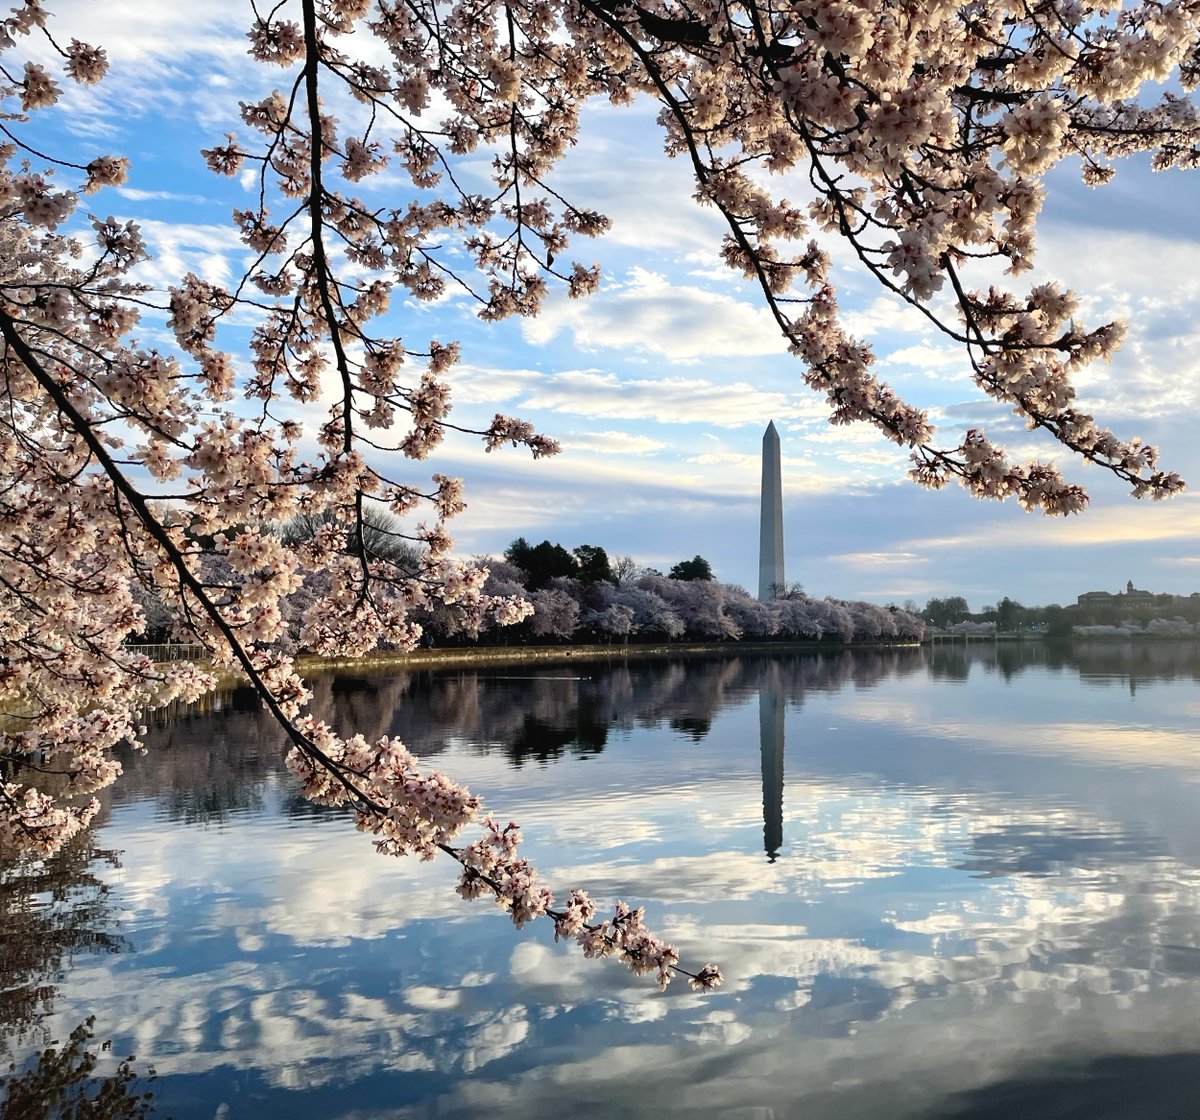 You heard it here first! Our cherry tree experts are predicting peak bloom to fall between March 22 - 25 this year. Start planning your visit now: nps.gov/cherry #Cherryblossom #BloomWatch #WashingtonDC 🌸🌸🌸